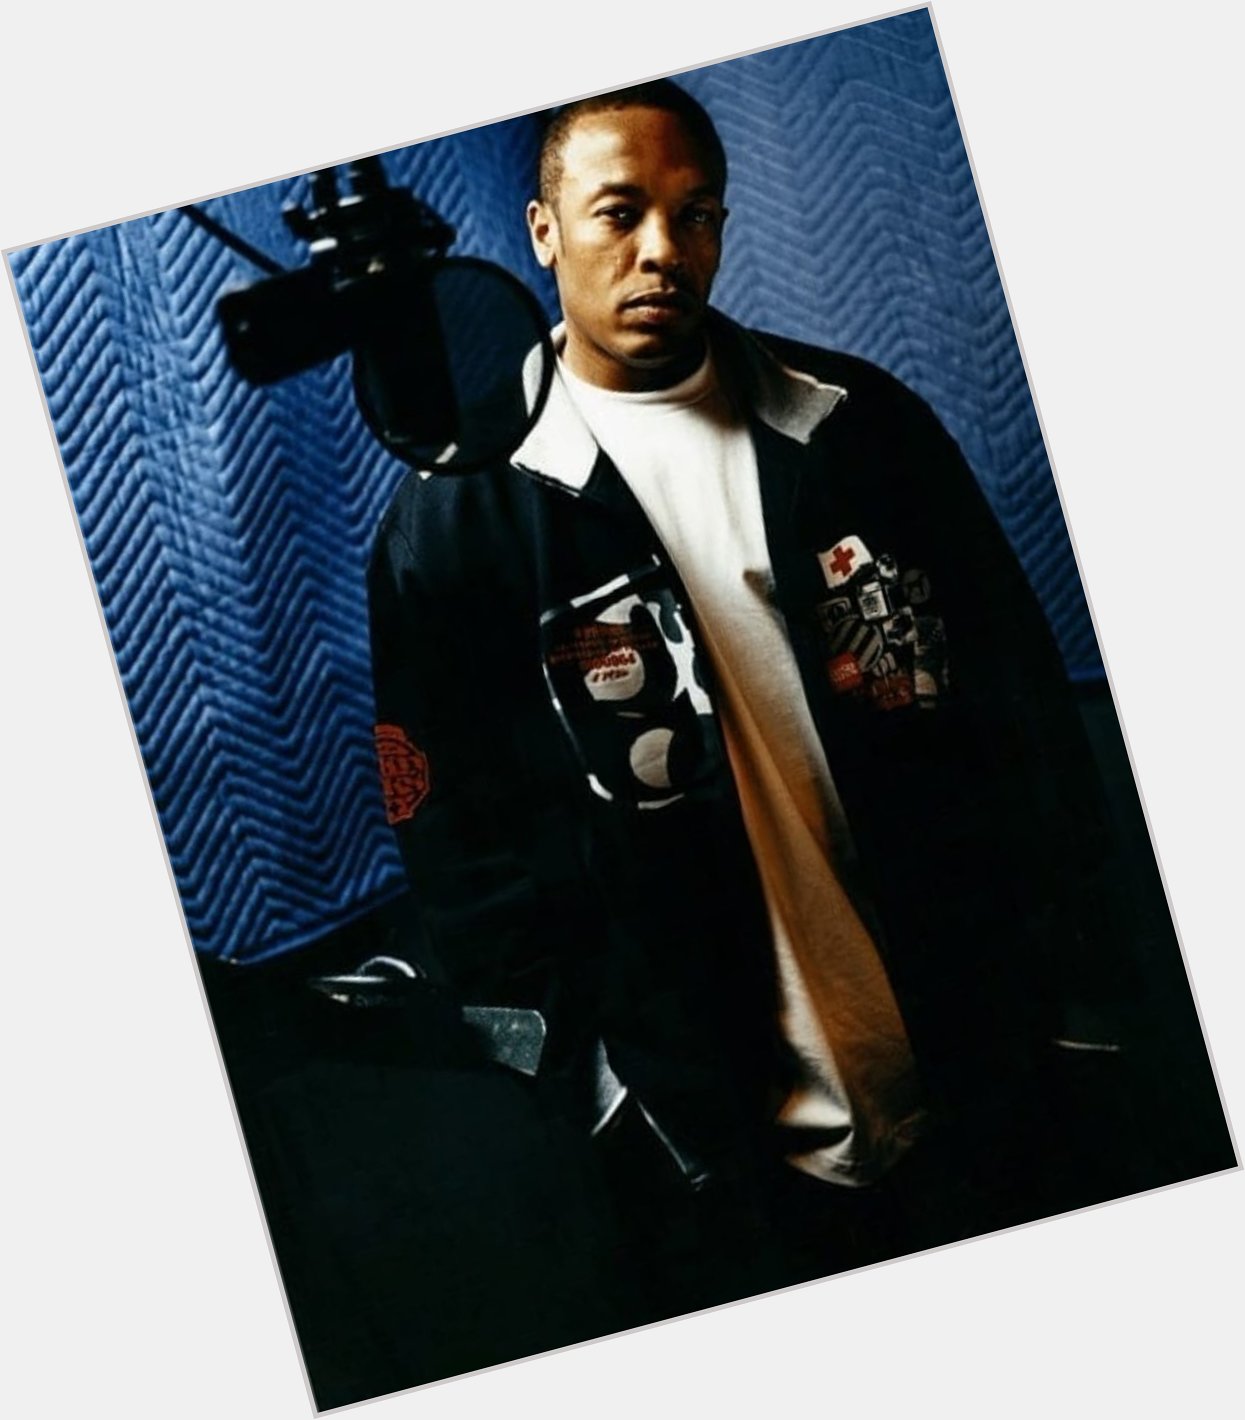 HAPPY BIRTHDAY DR. DRE! 

What\s your favorite Dre beat? 